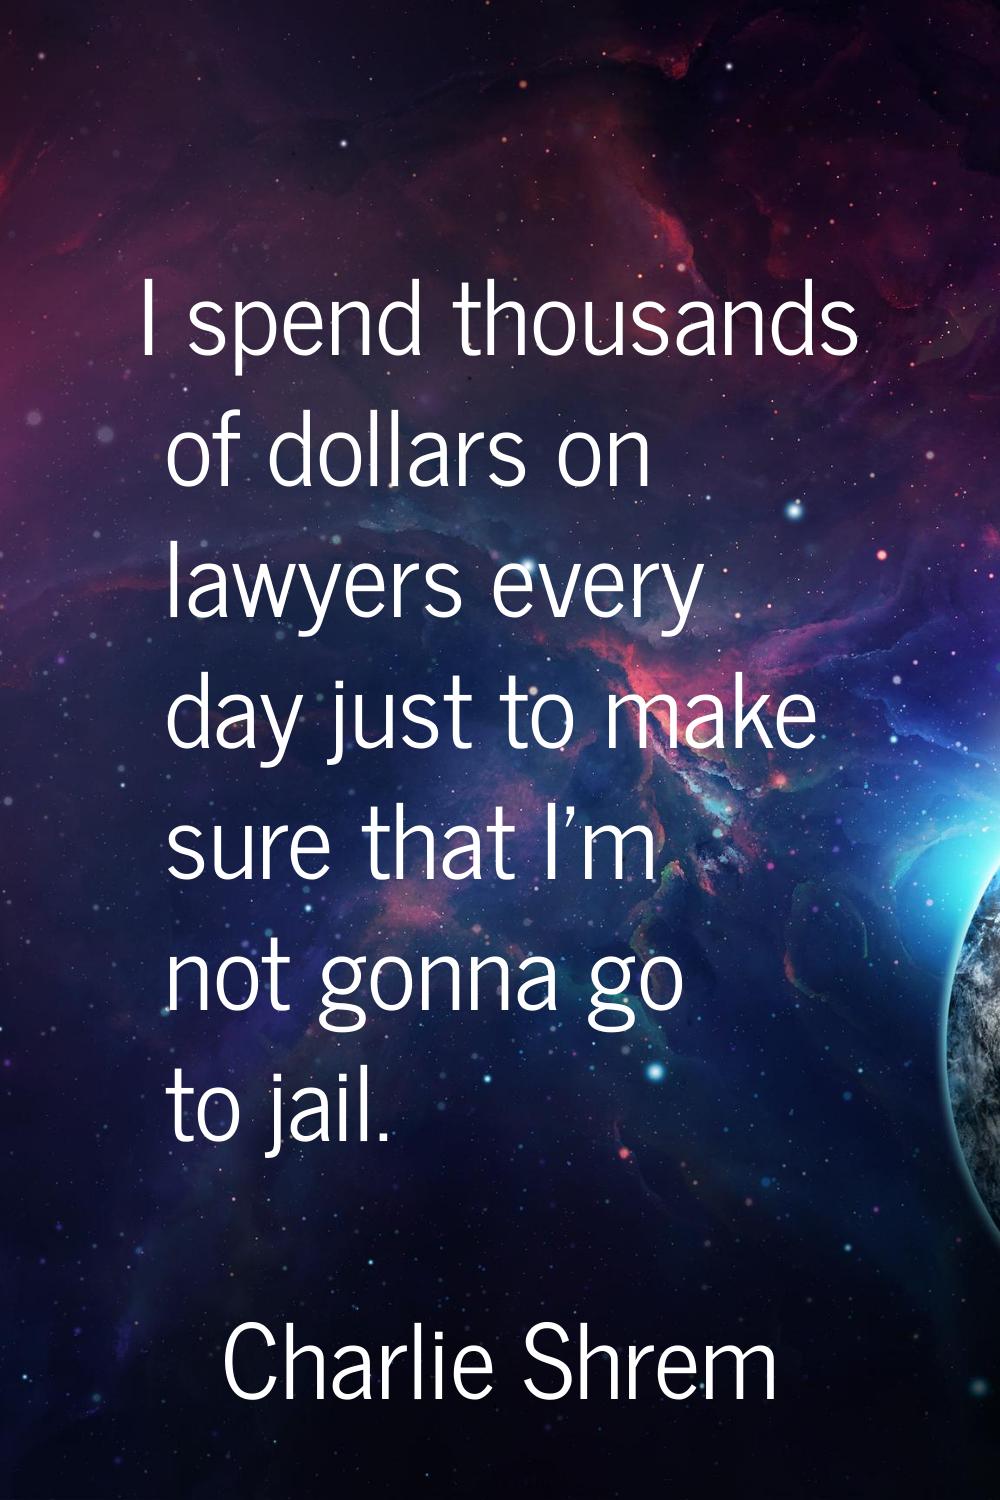 I spend thousands of dollars on lawyers every day just to make sure that I'm not gonna go to jail.